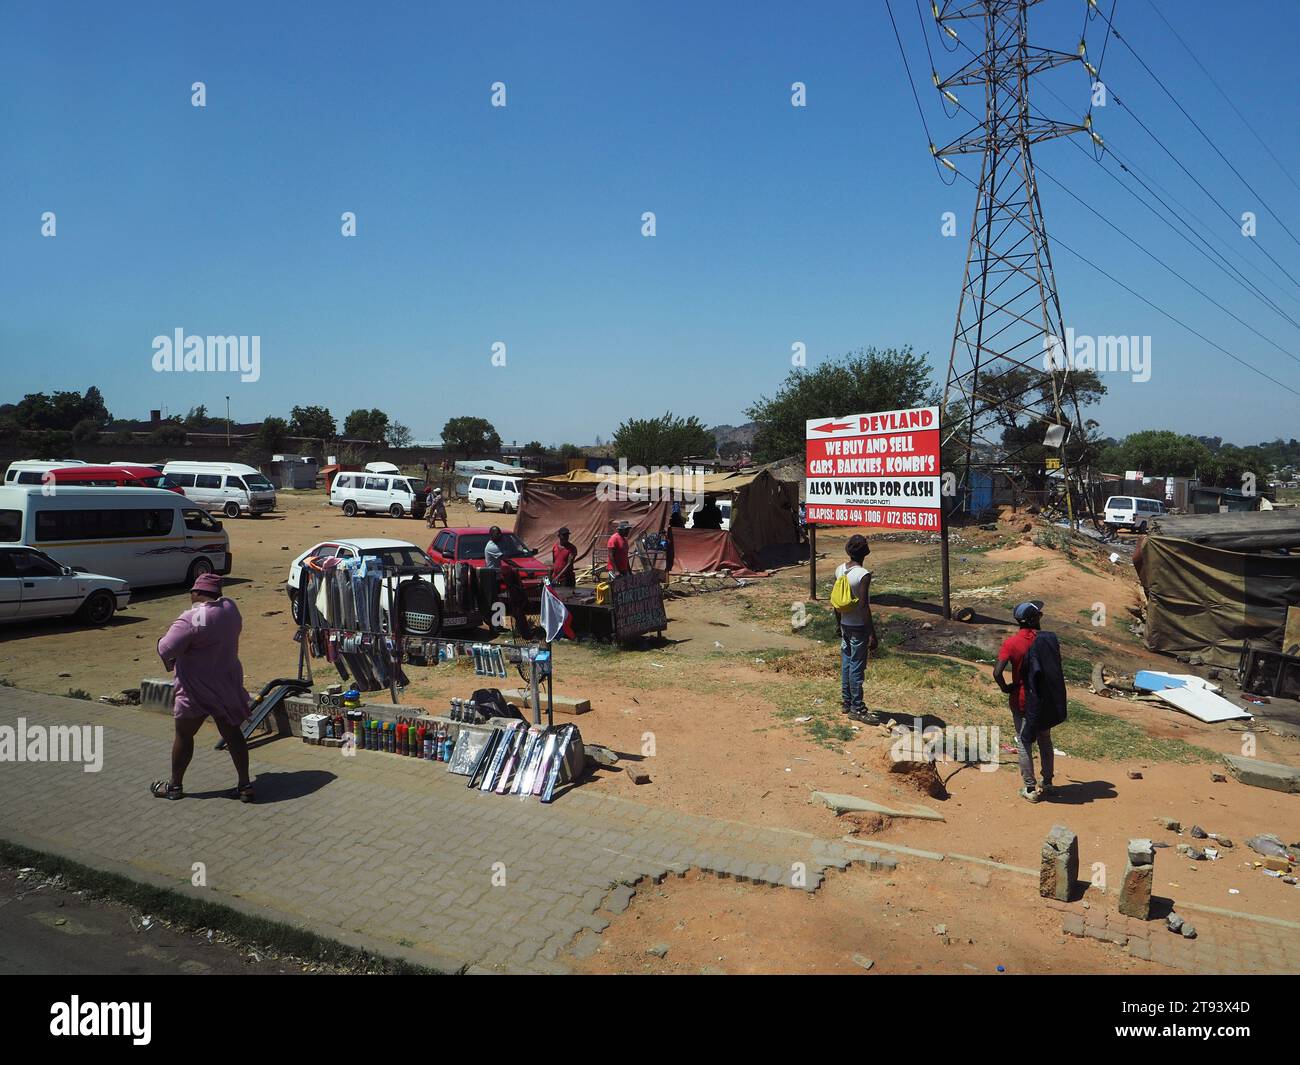 Street scene in Soweto township, Gauteng province, South Africa Stock Photo